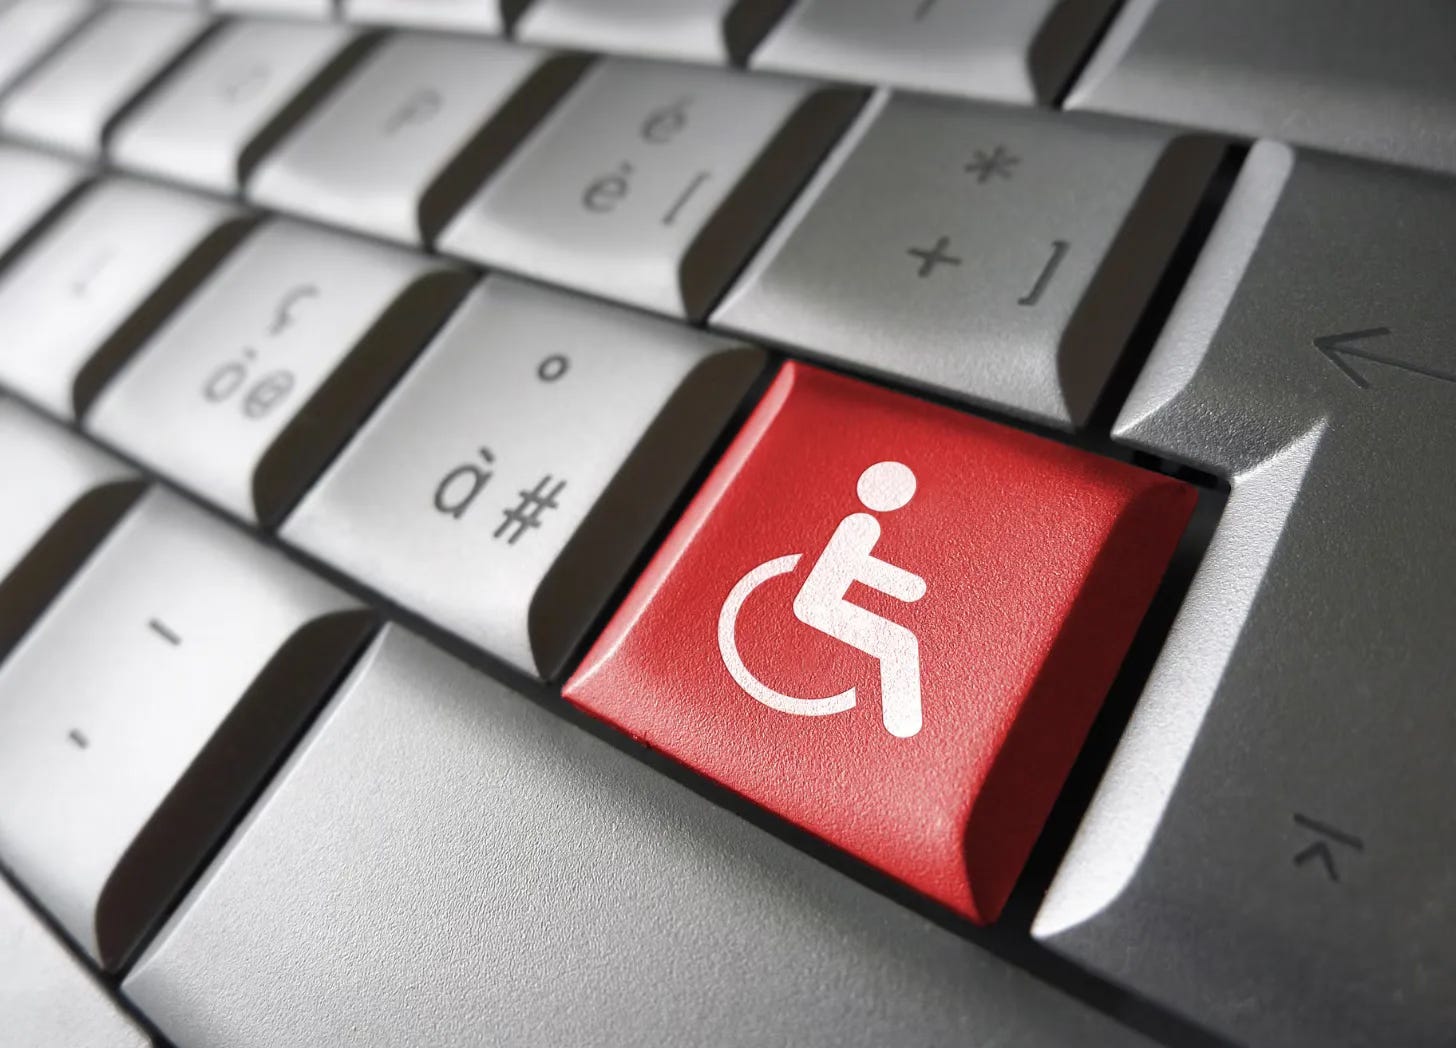 Closeup of a keyboard with a red wheelchair symbol key